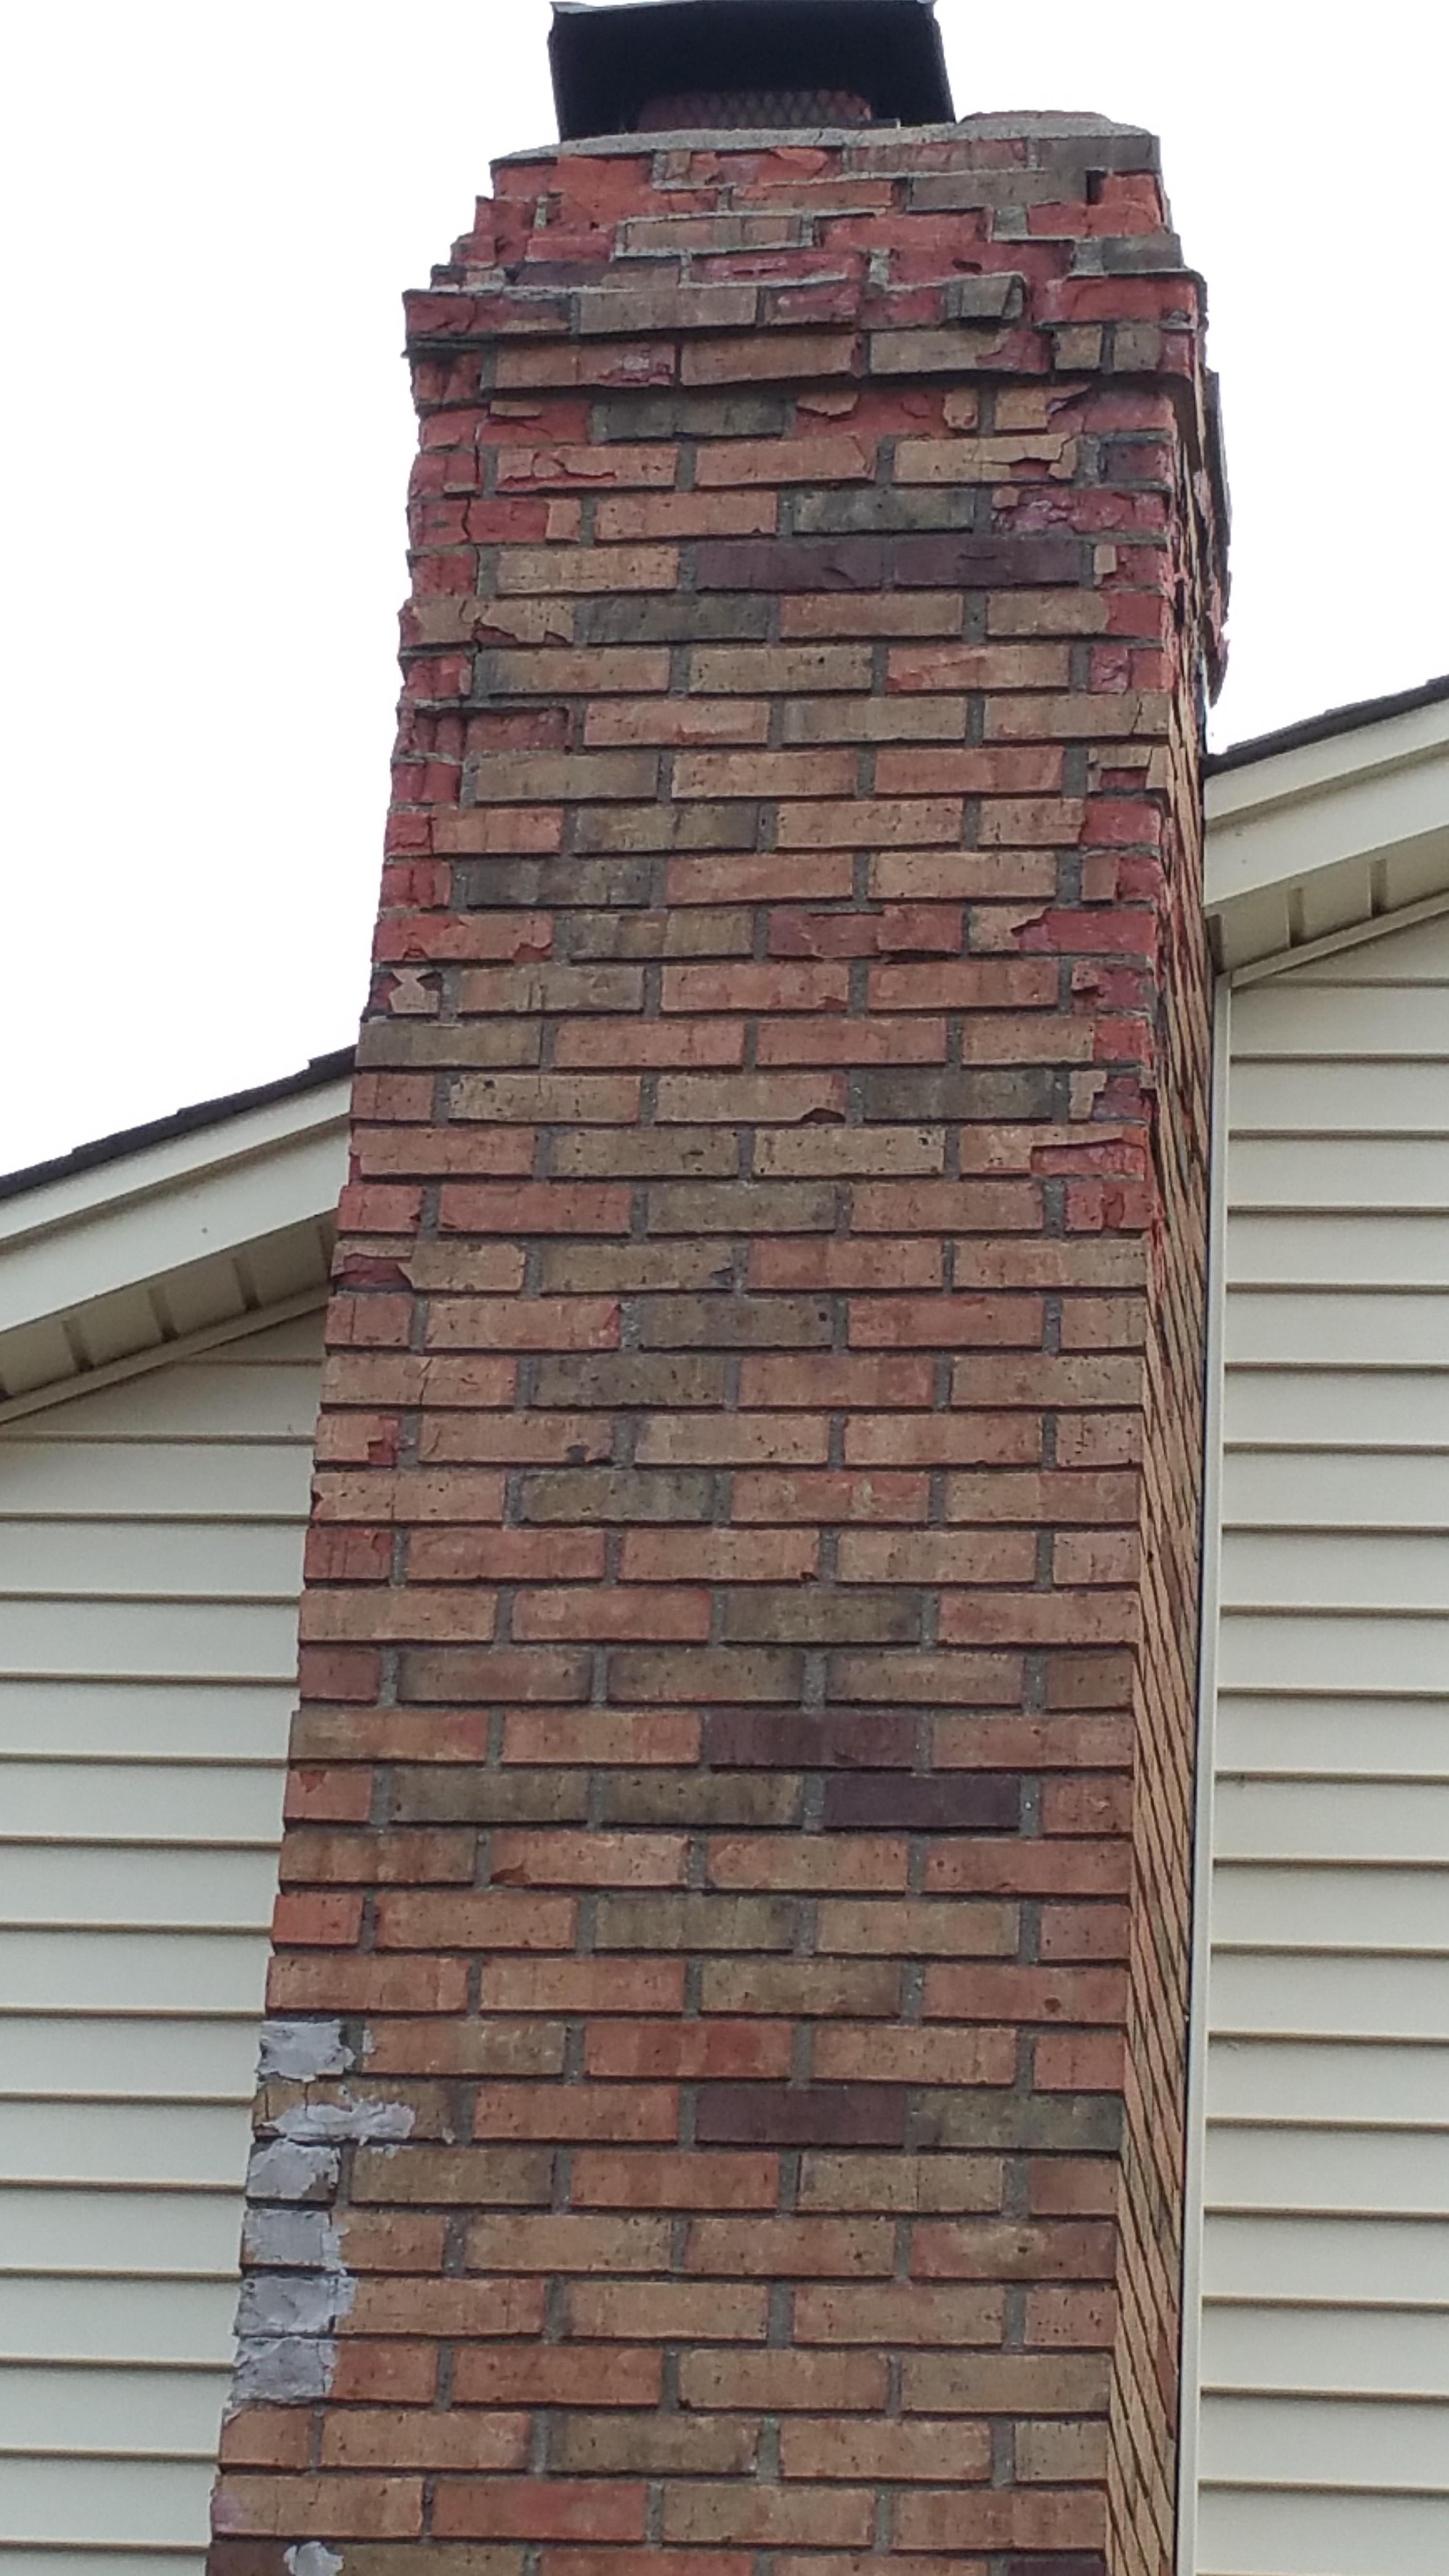 We removed the entire chimney and liner system, then we replaced it